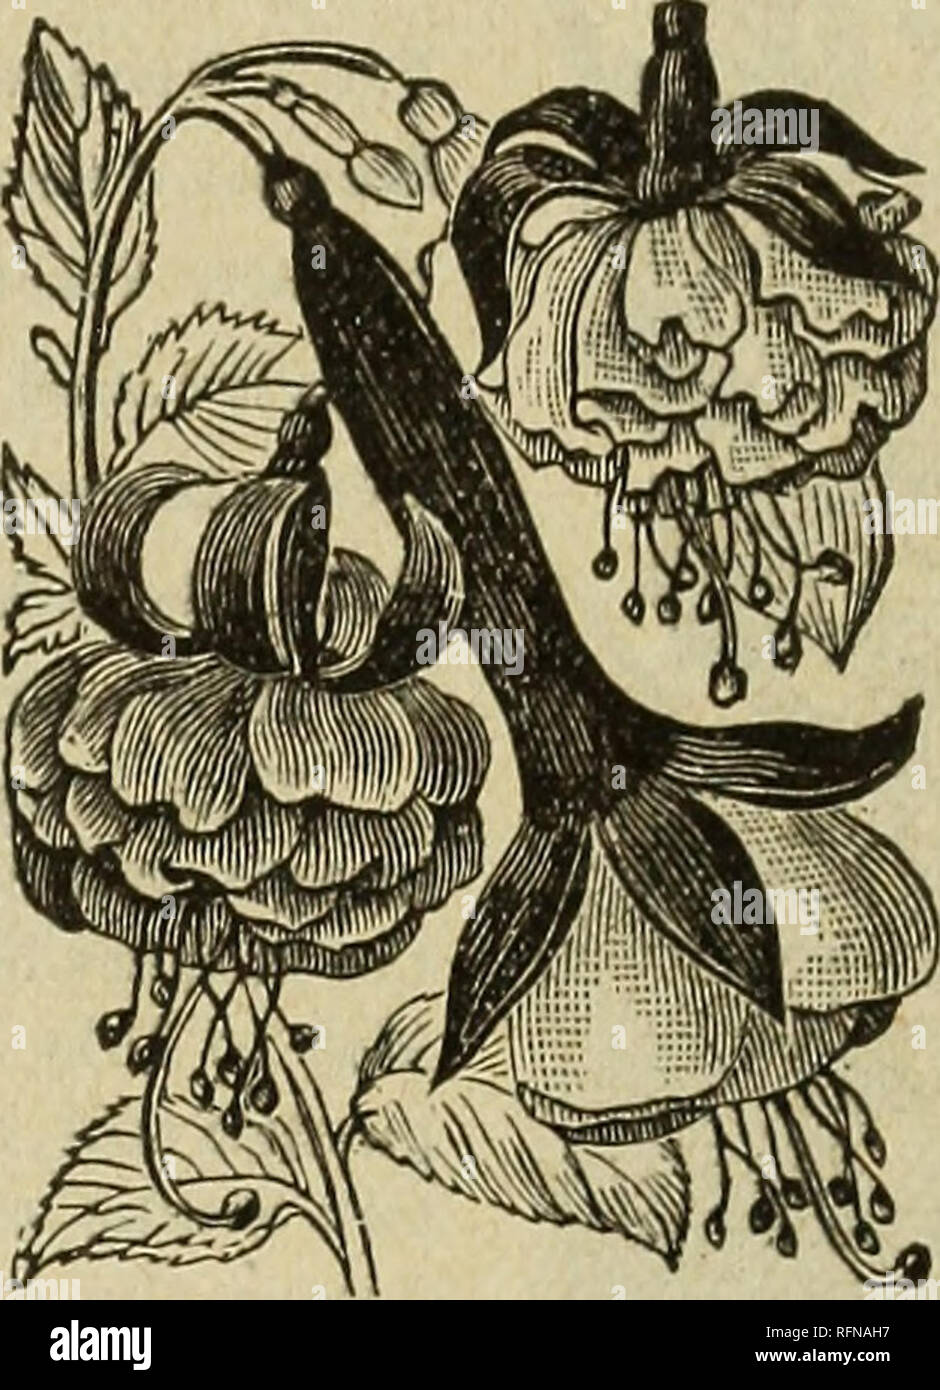 . Seeds for the garden, farm, &amp; field. Vegetables Seeds Catalogs; Flowers Seeds Catalogs; Grasses Seeds Catalogs; Gardening Equipment and supplies Catalogs; Commercial catalogs Missouri Saint Louis. Gloxinia, No. 614. Chinese Primrose, No. 620. 616 — Lantana, A fine bedding plant; different colors, mixed....10 PRIMULA-Chinese Primrose. A charming, profuse flowering plant, indispensable for winter and spring decoration and a uni- versal favorite. Our seeds are imported from one of the best growers in Europe. 618—PRIMULA—Chin. Fimbri. Rubra. Red fringed 25 819—Chinensis Fimbriata Alba, White Stock Photo